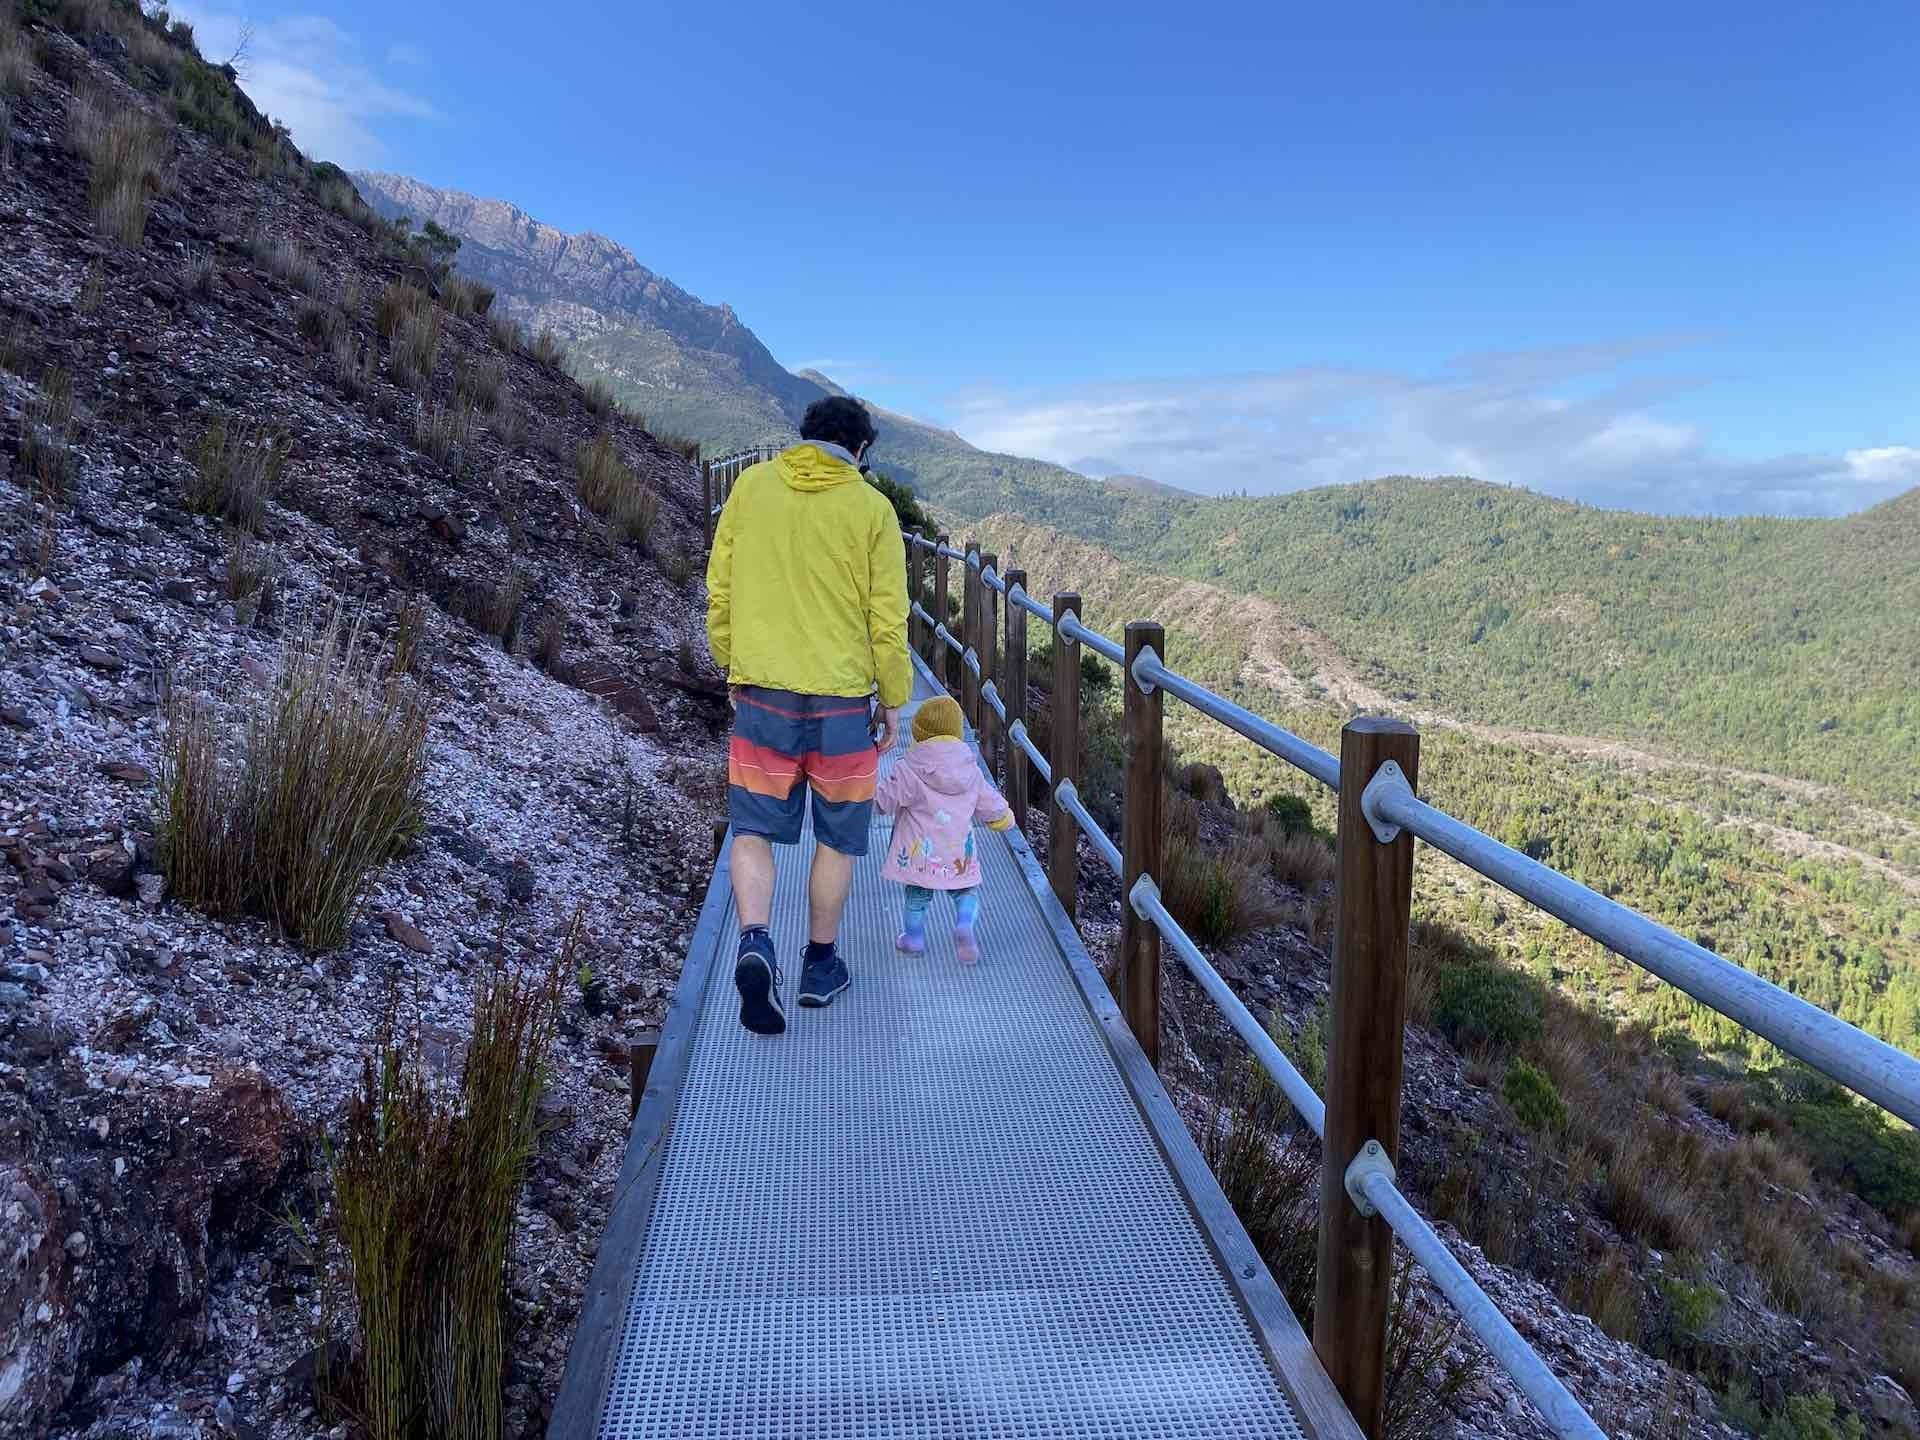 How To Travel Tasmania With Your Adventure Family - Sarah Tayler, Tasmania, Queenstown, Track, Family, Dad